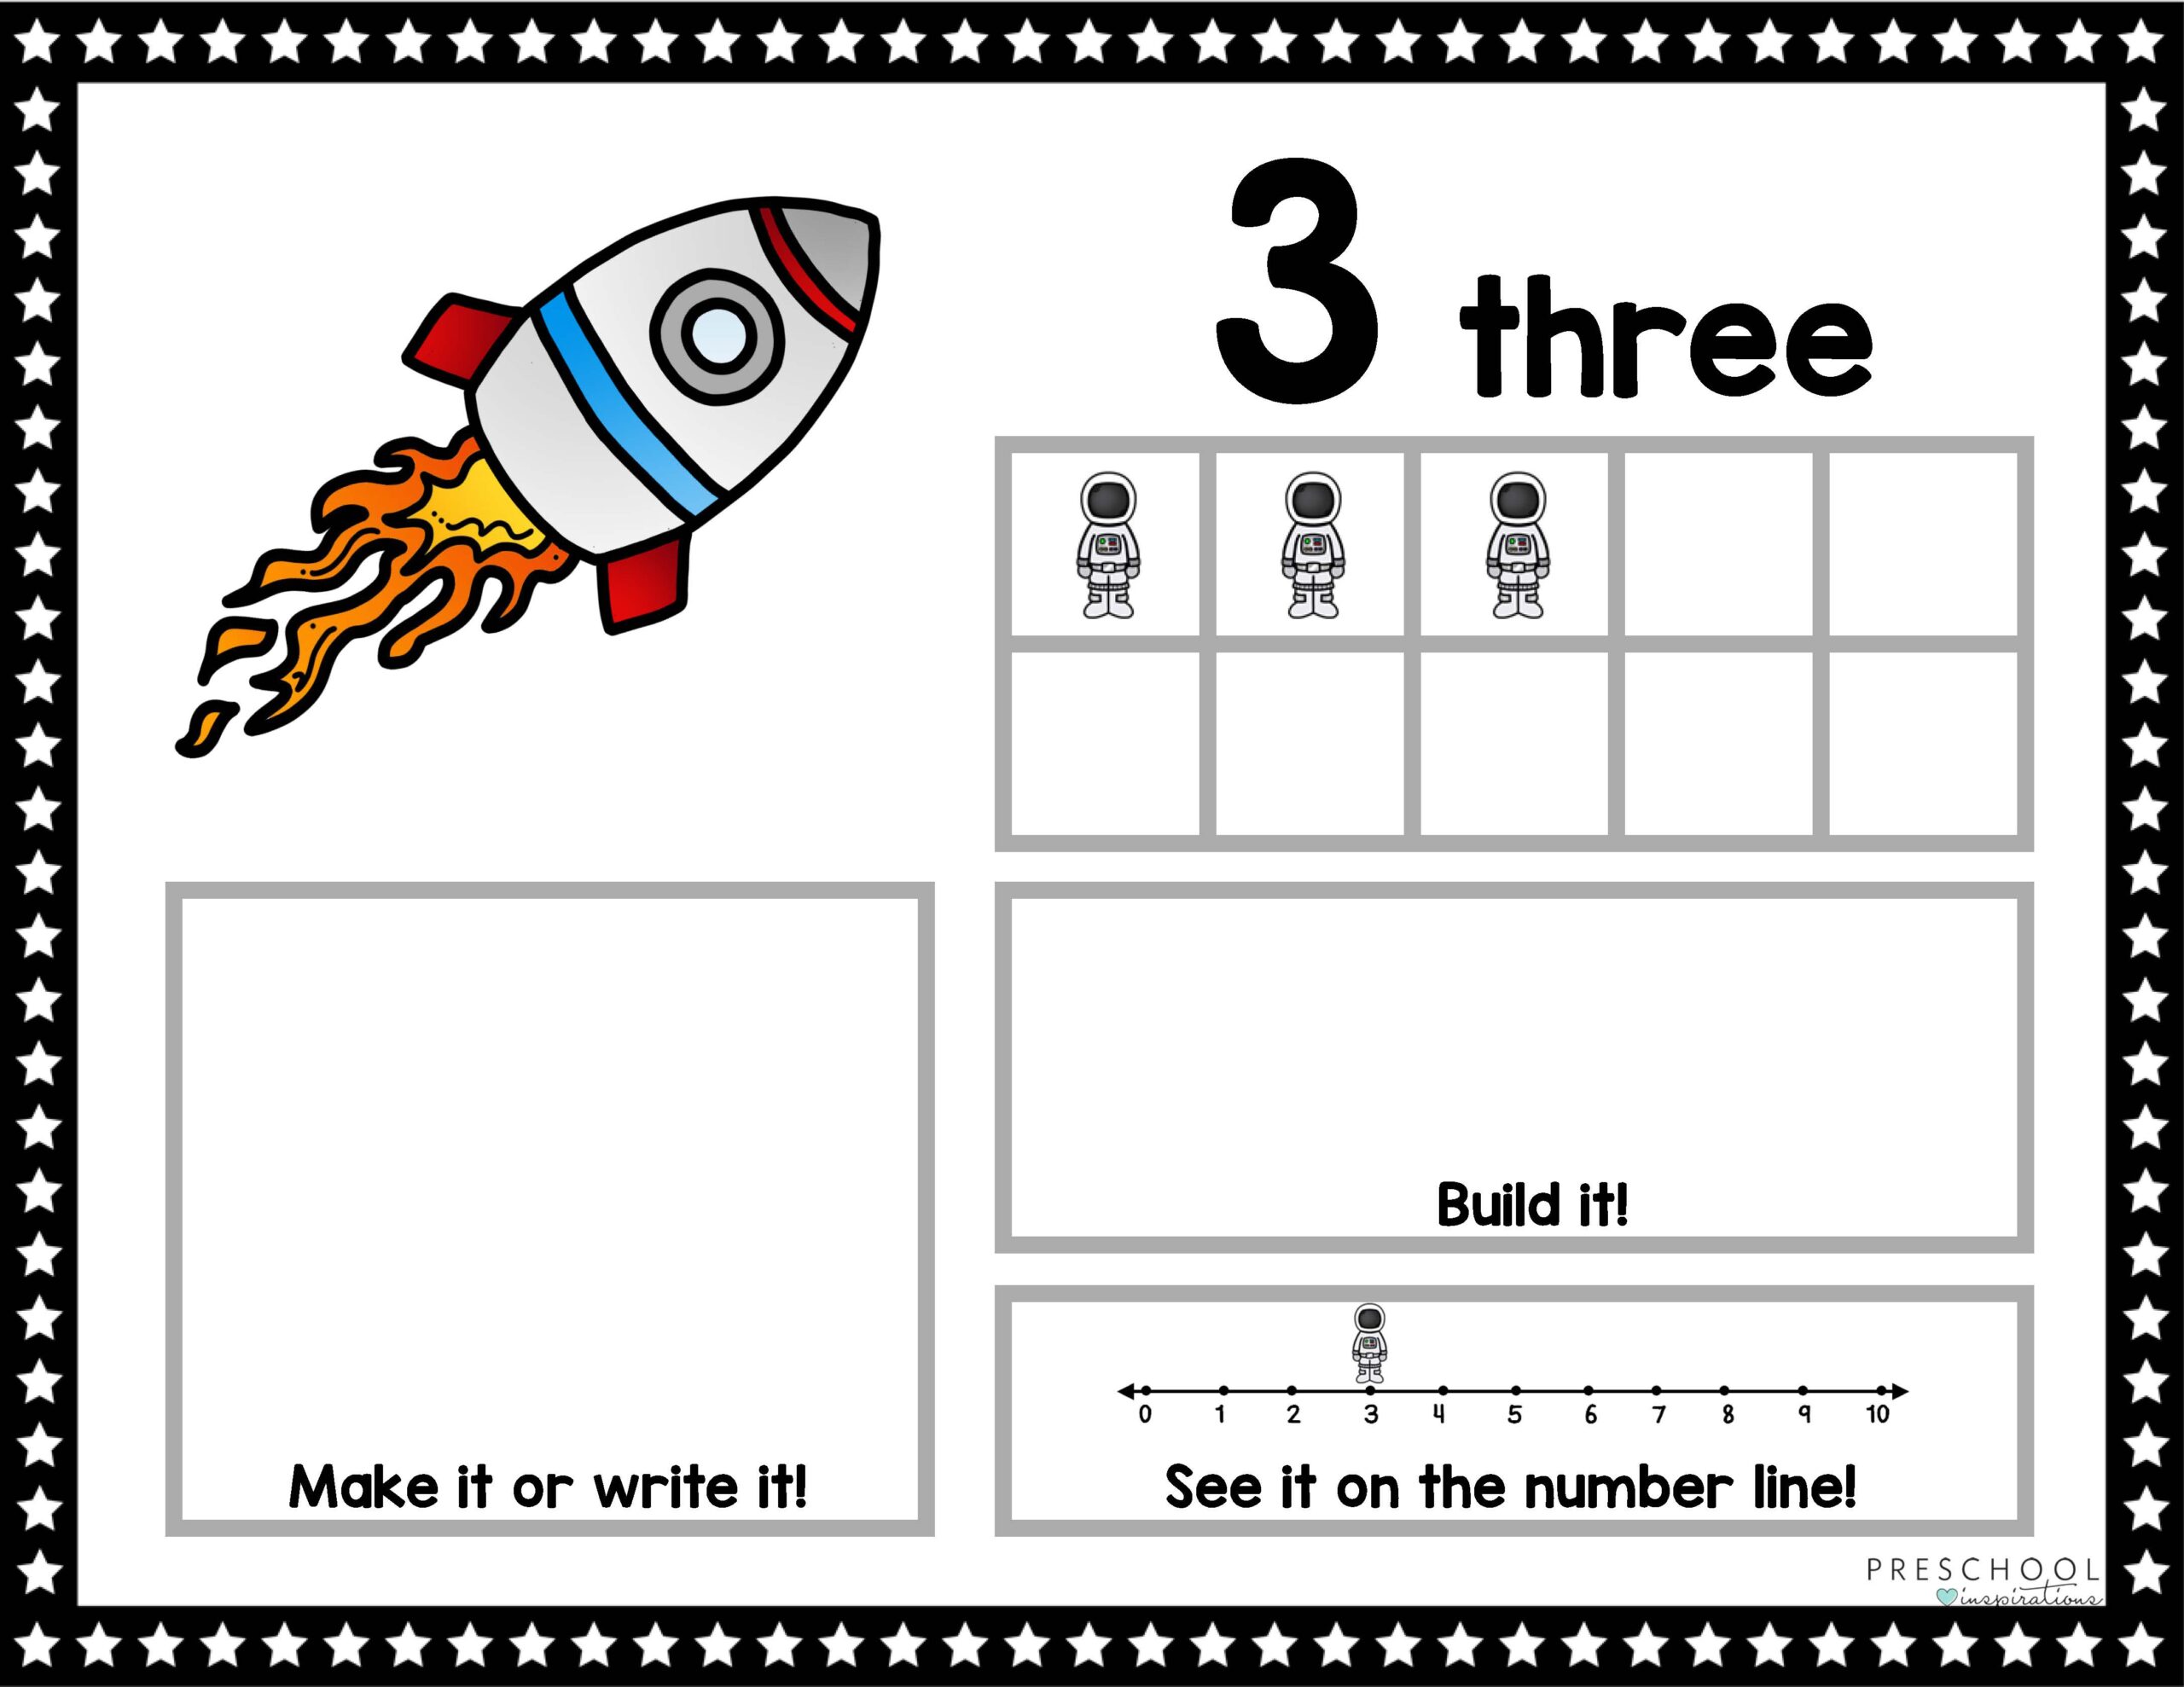 a space-themed ten frame mat showing the number three